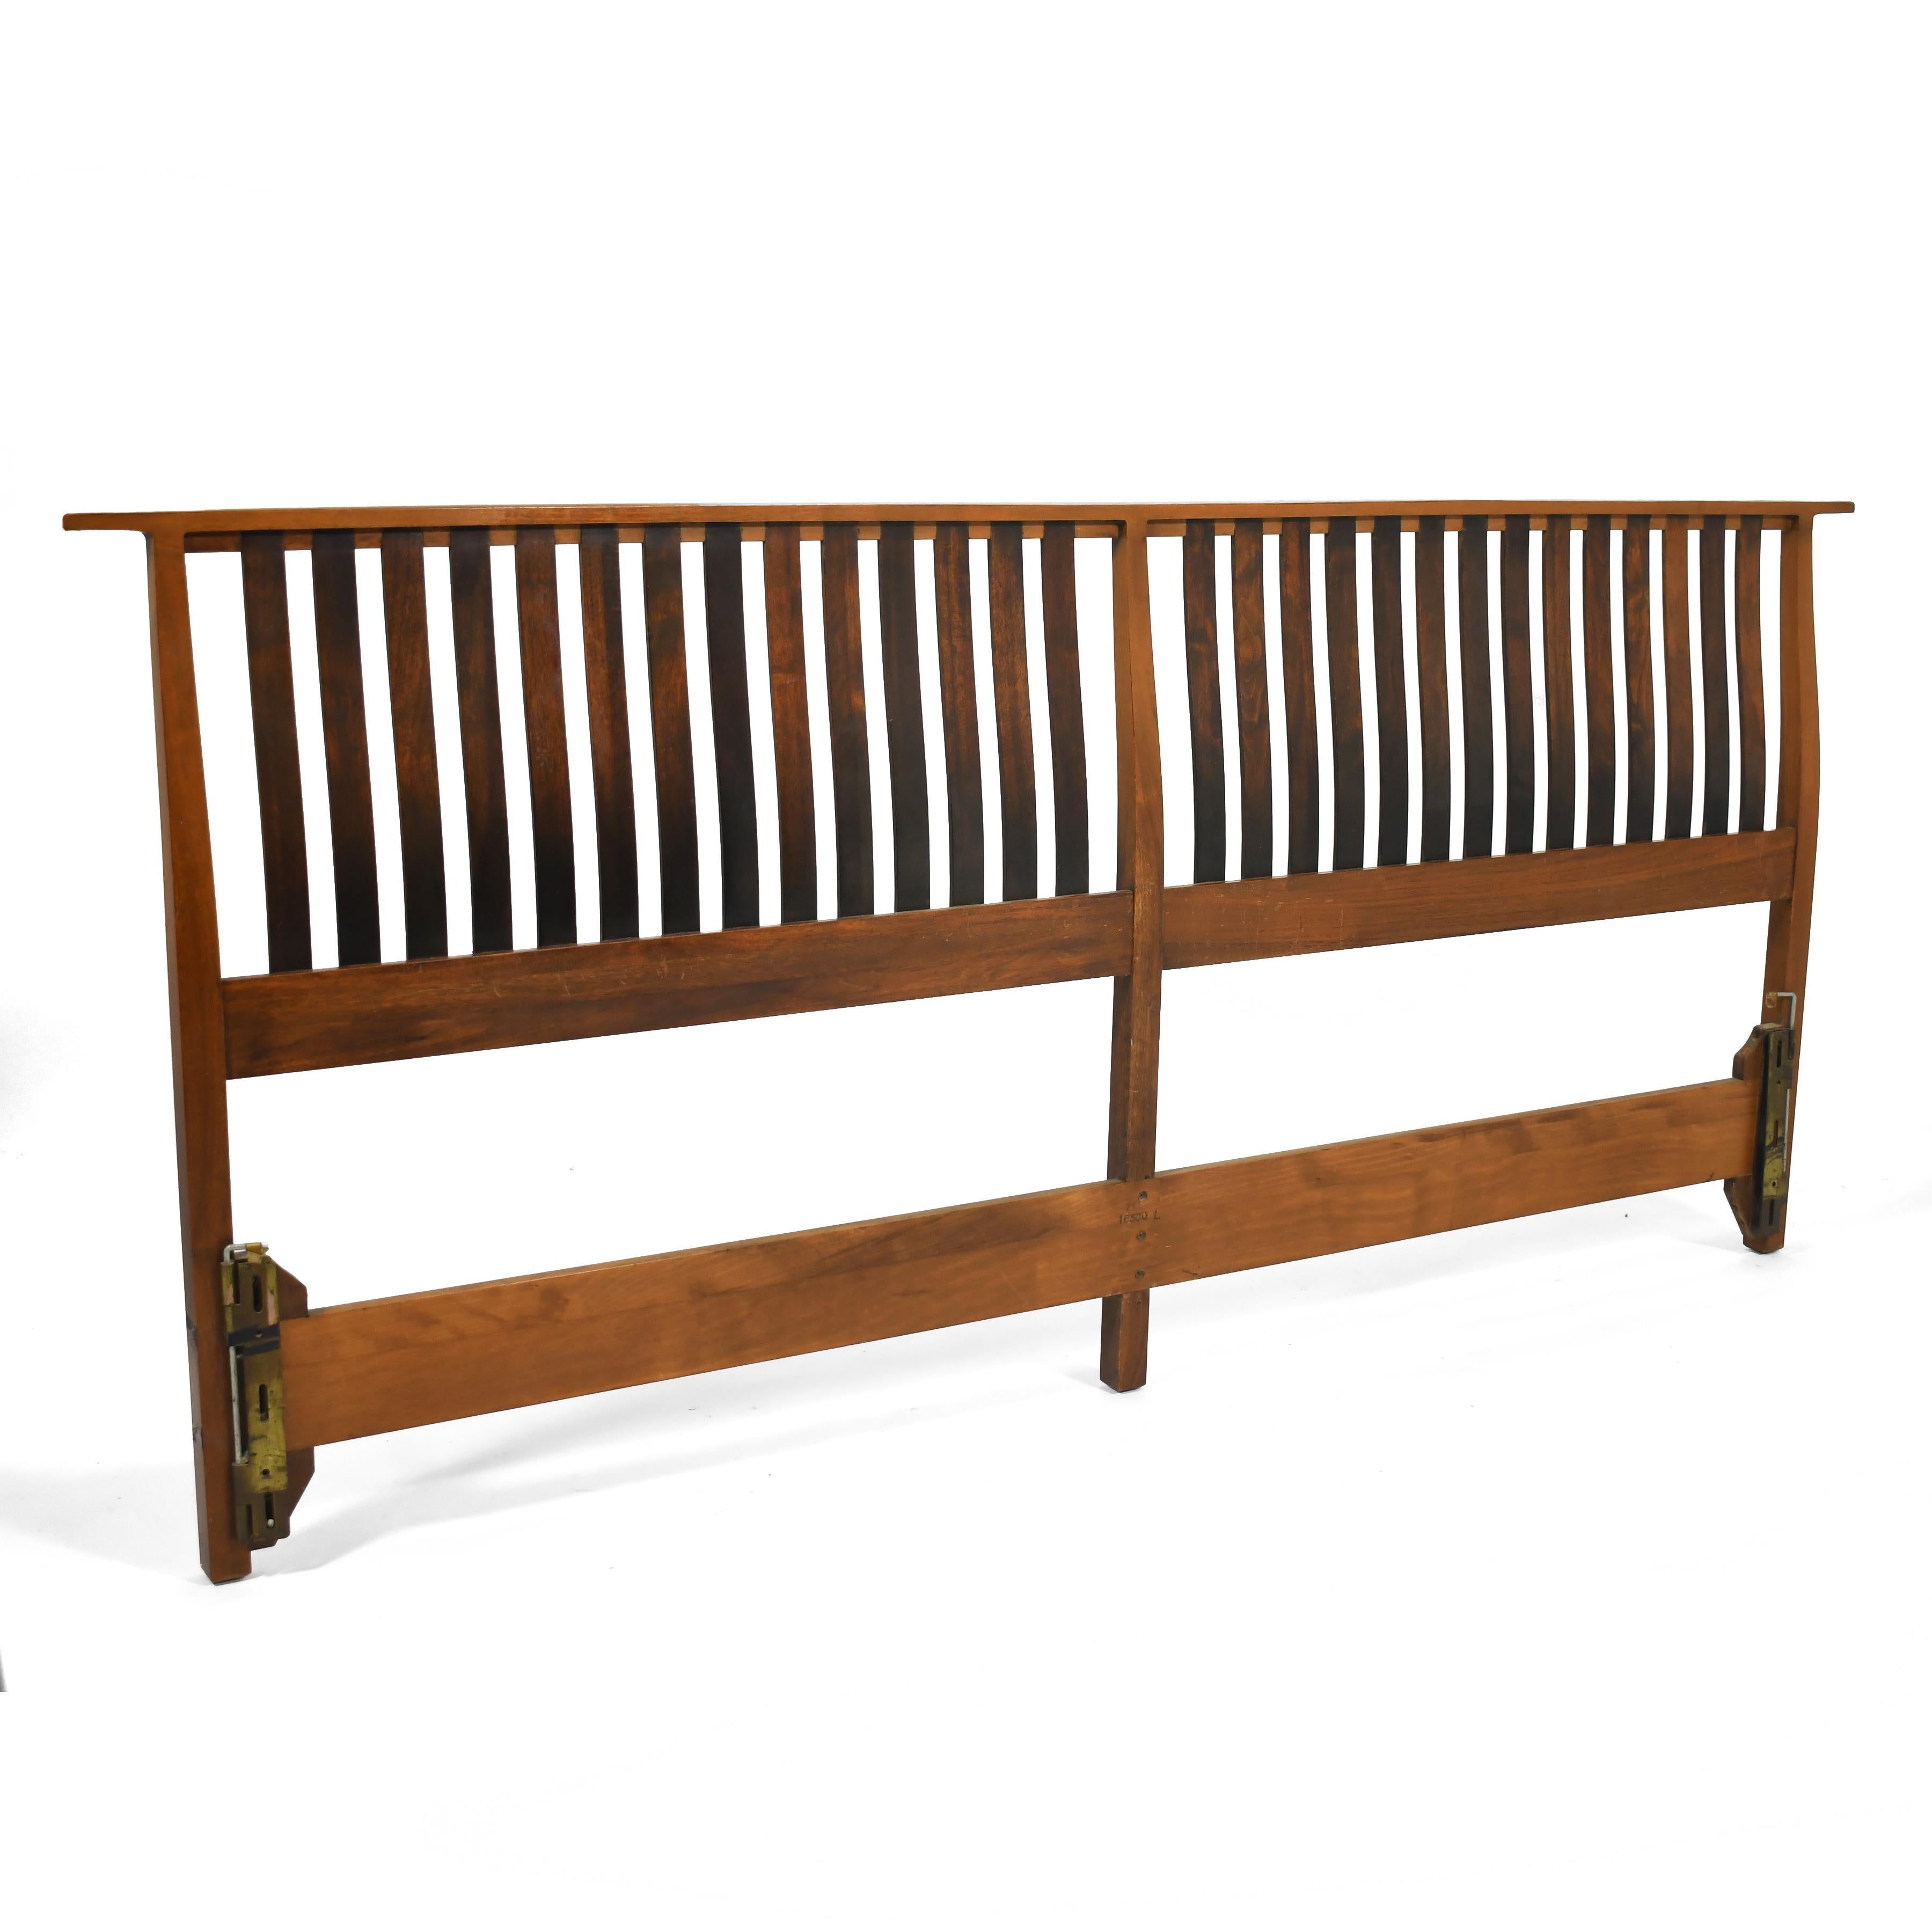 This handsome and beautifully crafted headboard features a beautifully sculpted frame with dark wood slats set with through-tennon joinery.

38